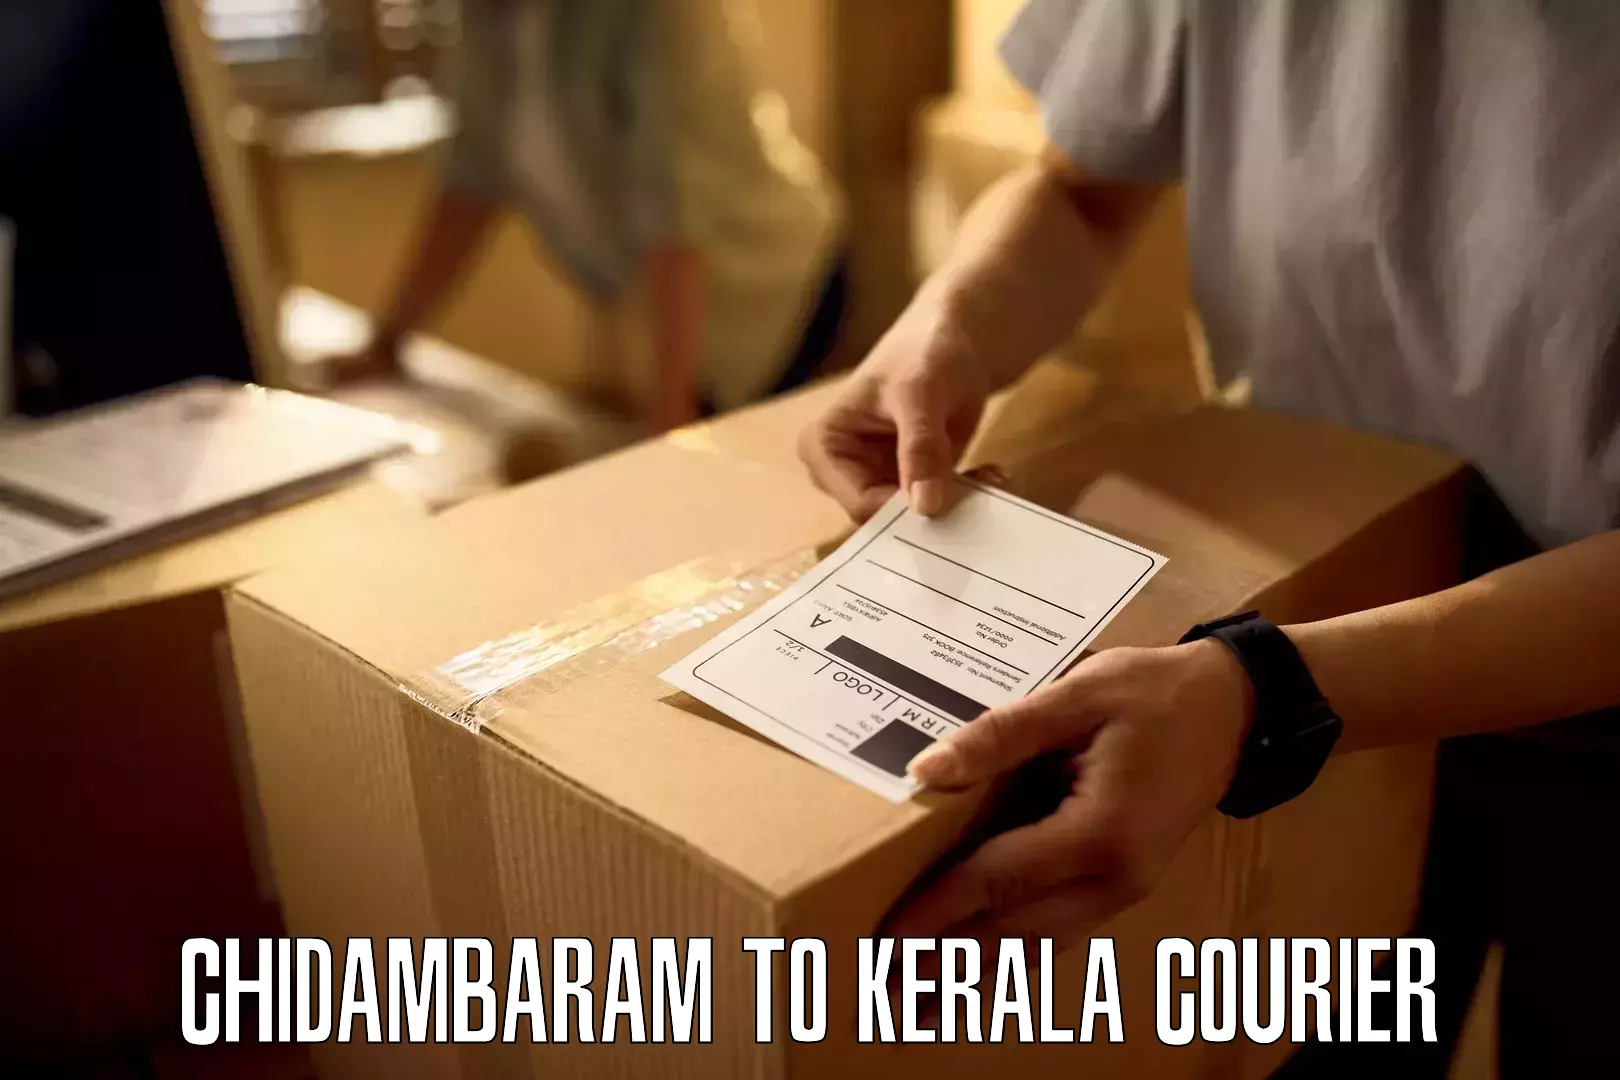 Subscription-based courier Chidambaram to Nochad